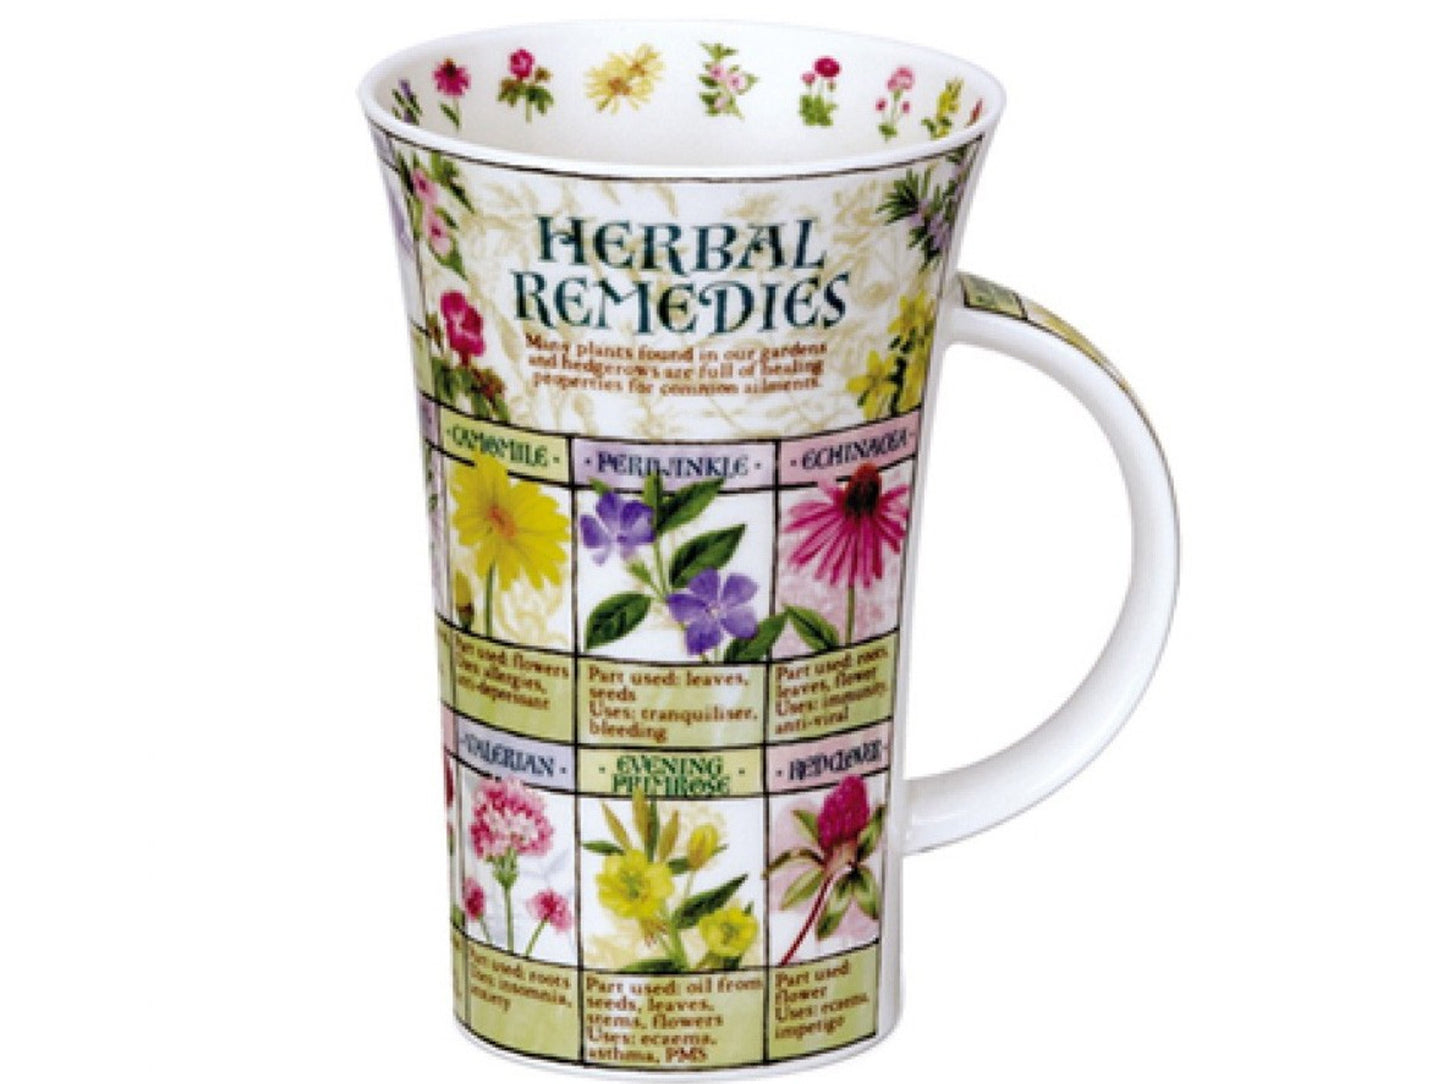 Dunoon Glencoe Herbal Remedies Mug is a large fine bone china mug that depicts all different manner of herbs and flowers in various shades of purple, pink and yellow, along with what each can be used to treat. Dotted around the inner rim the user will fine small prints of different flowers.